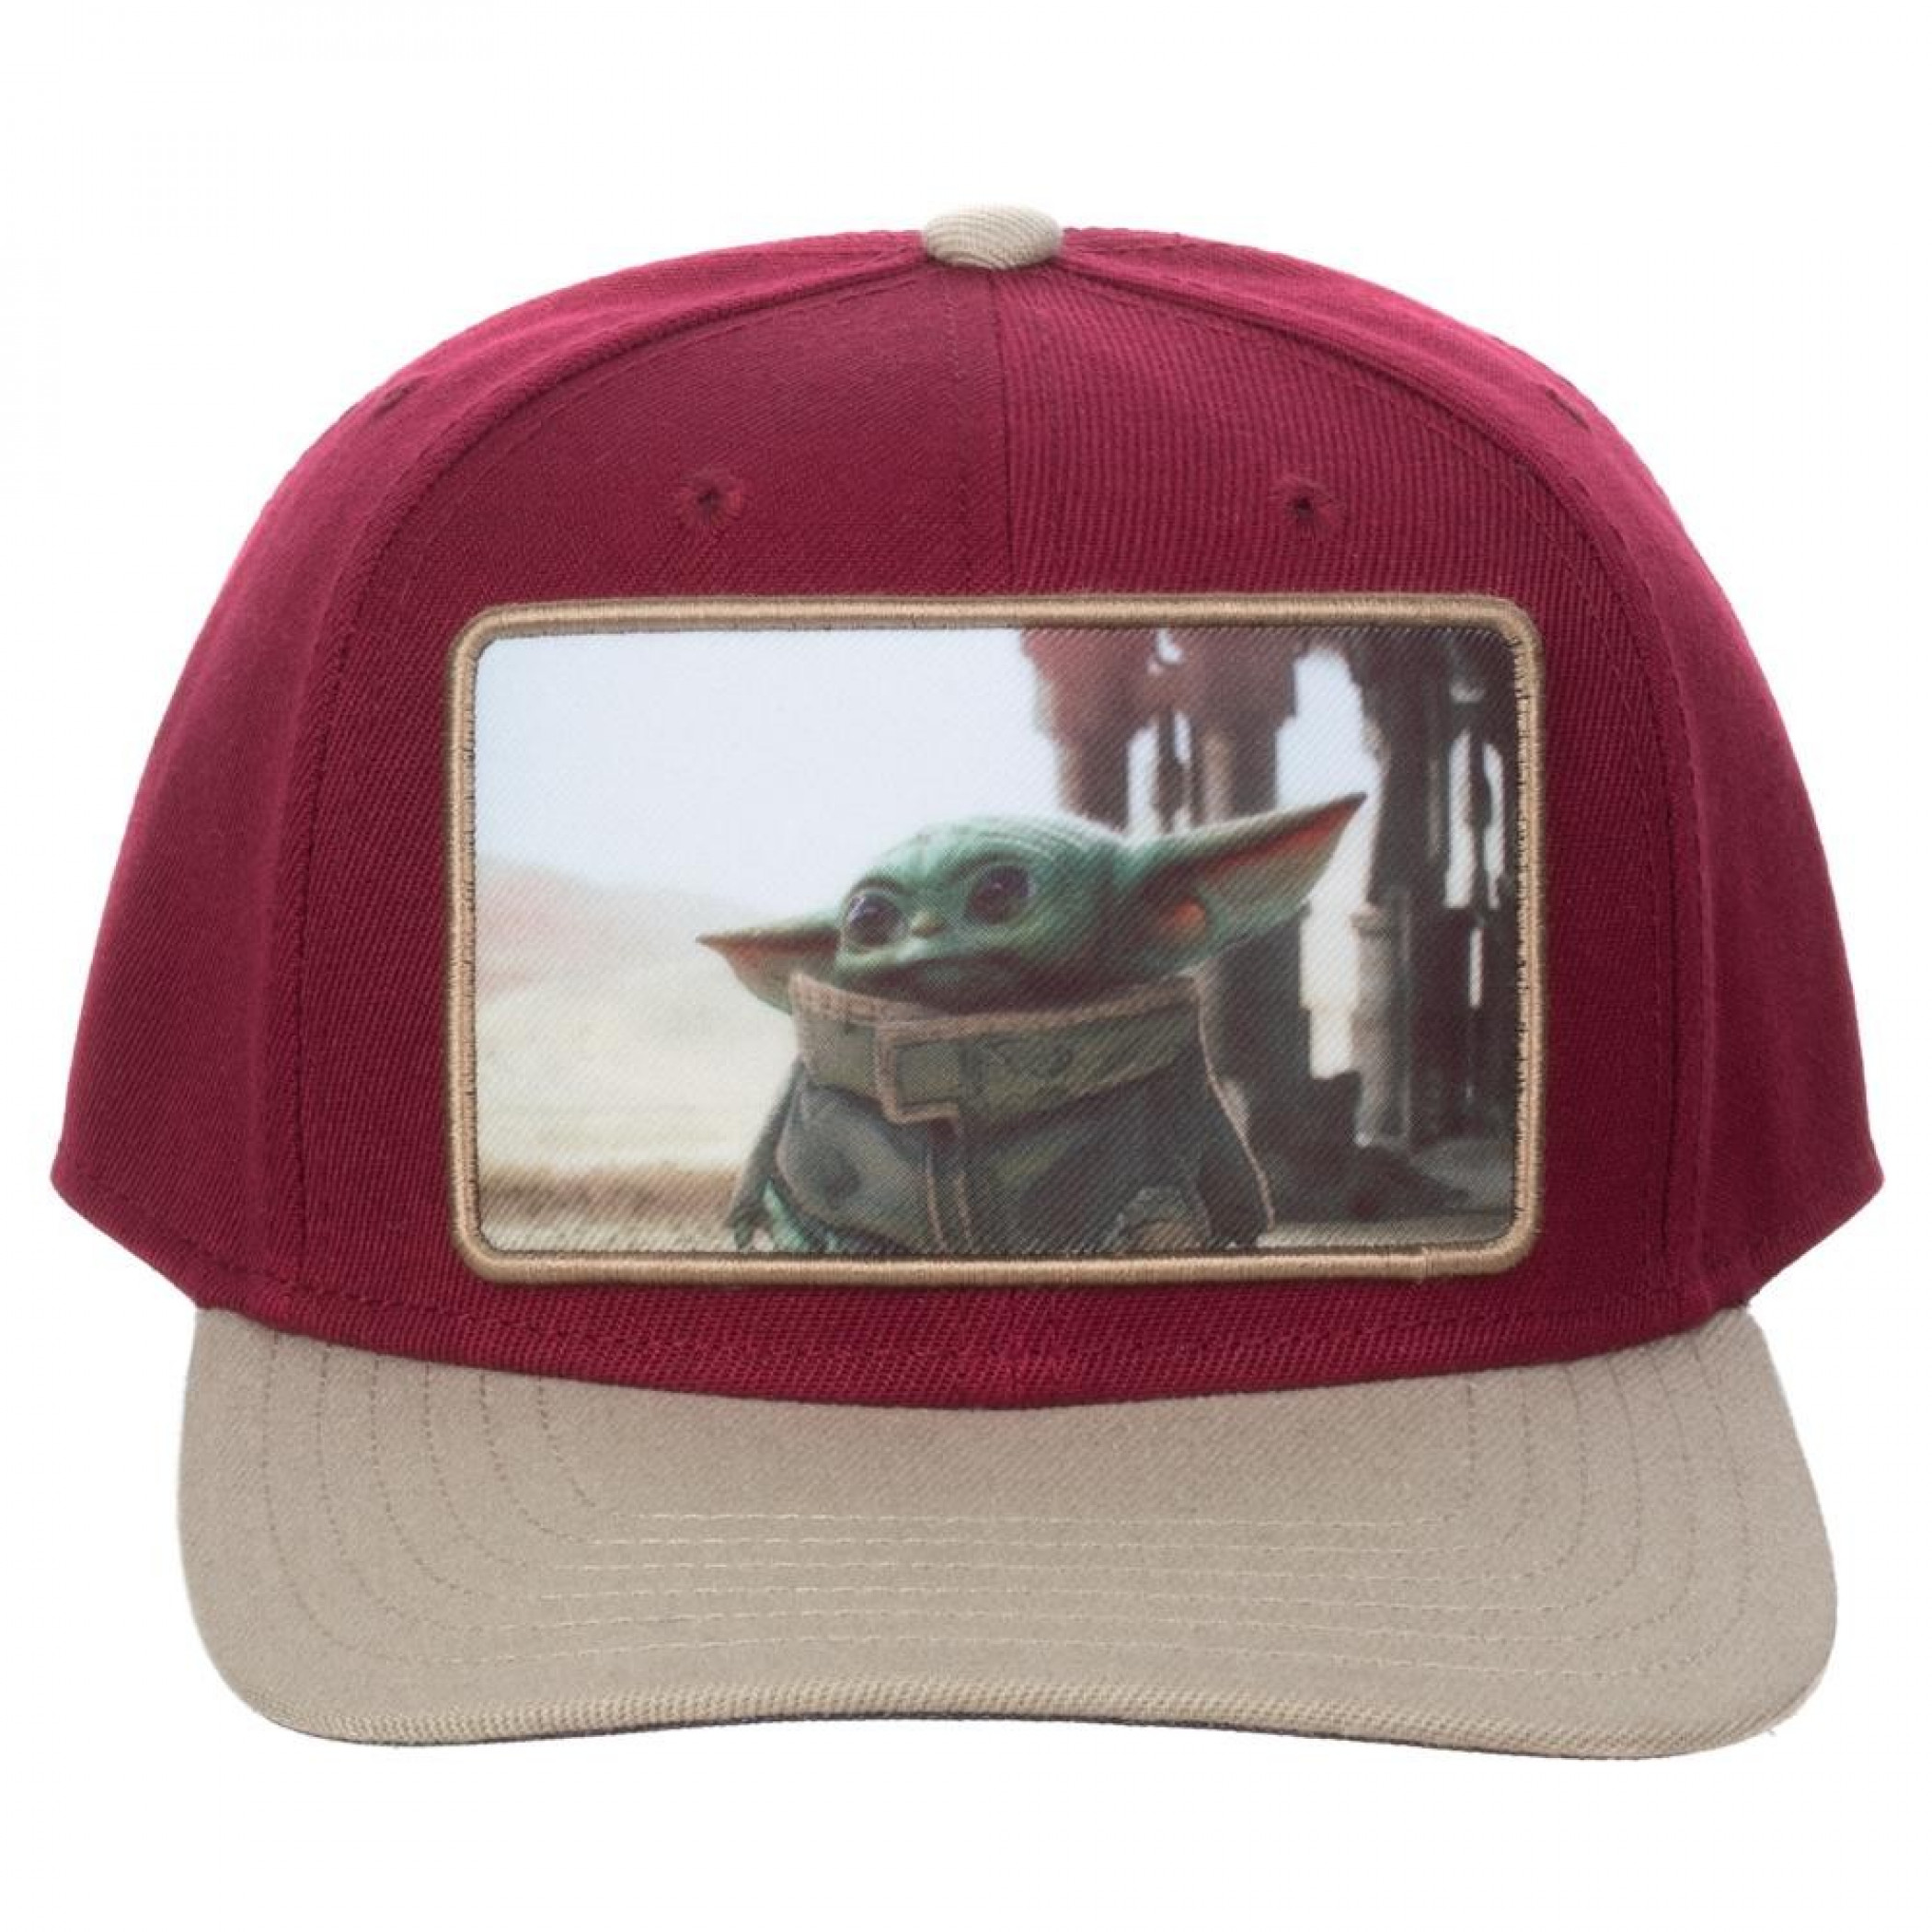 Star Wars The Child Pre-Curved Bill Snapback